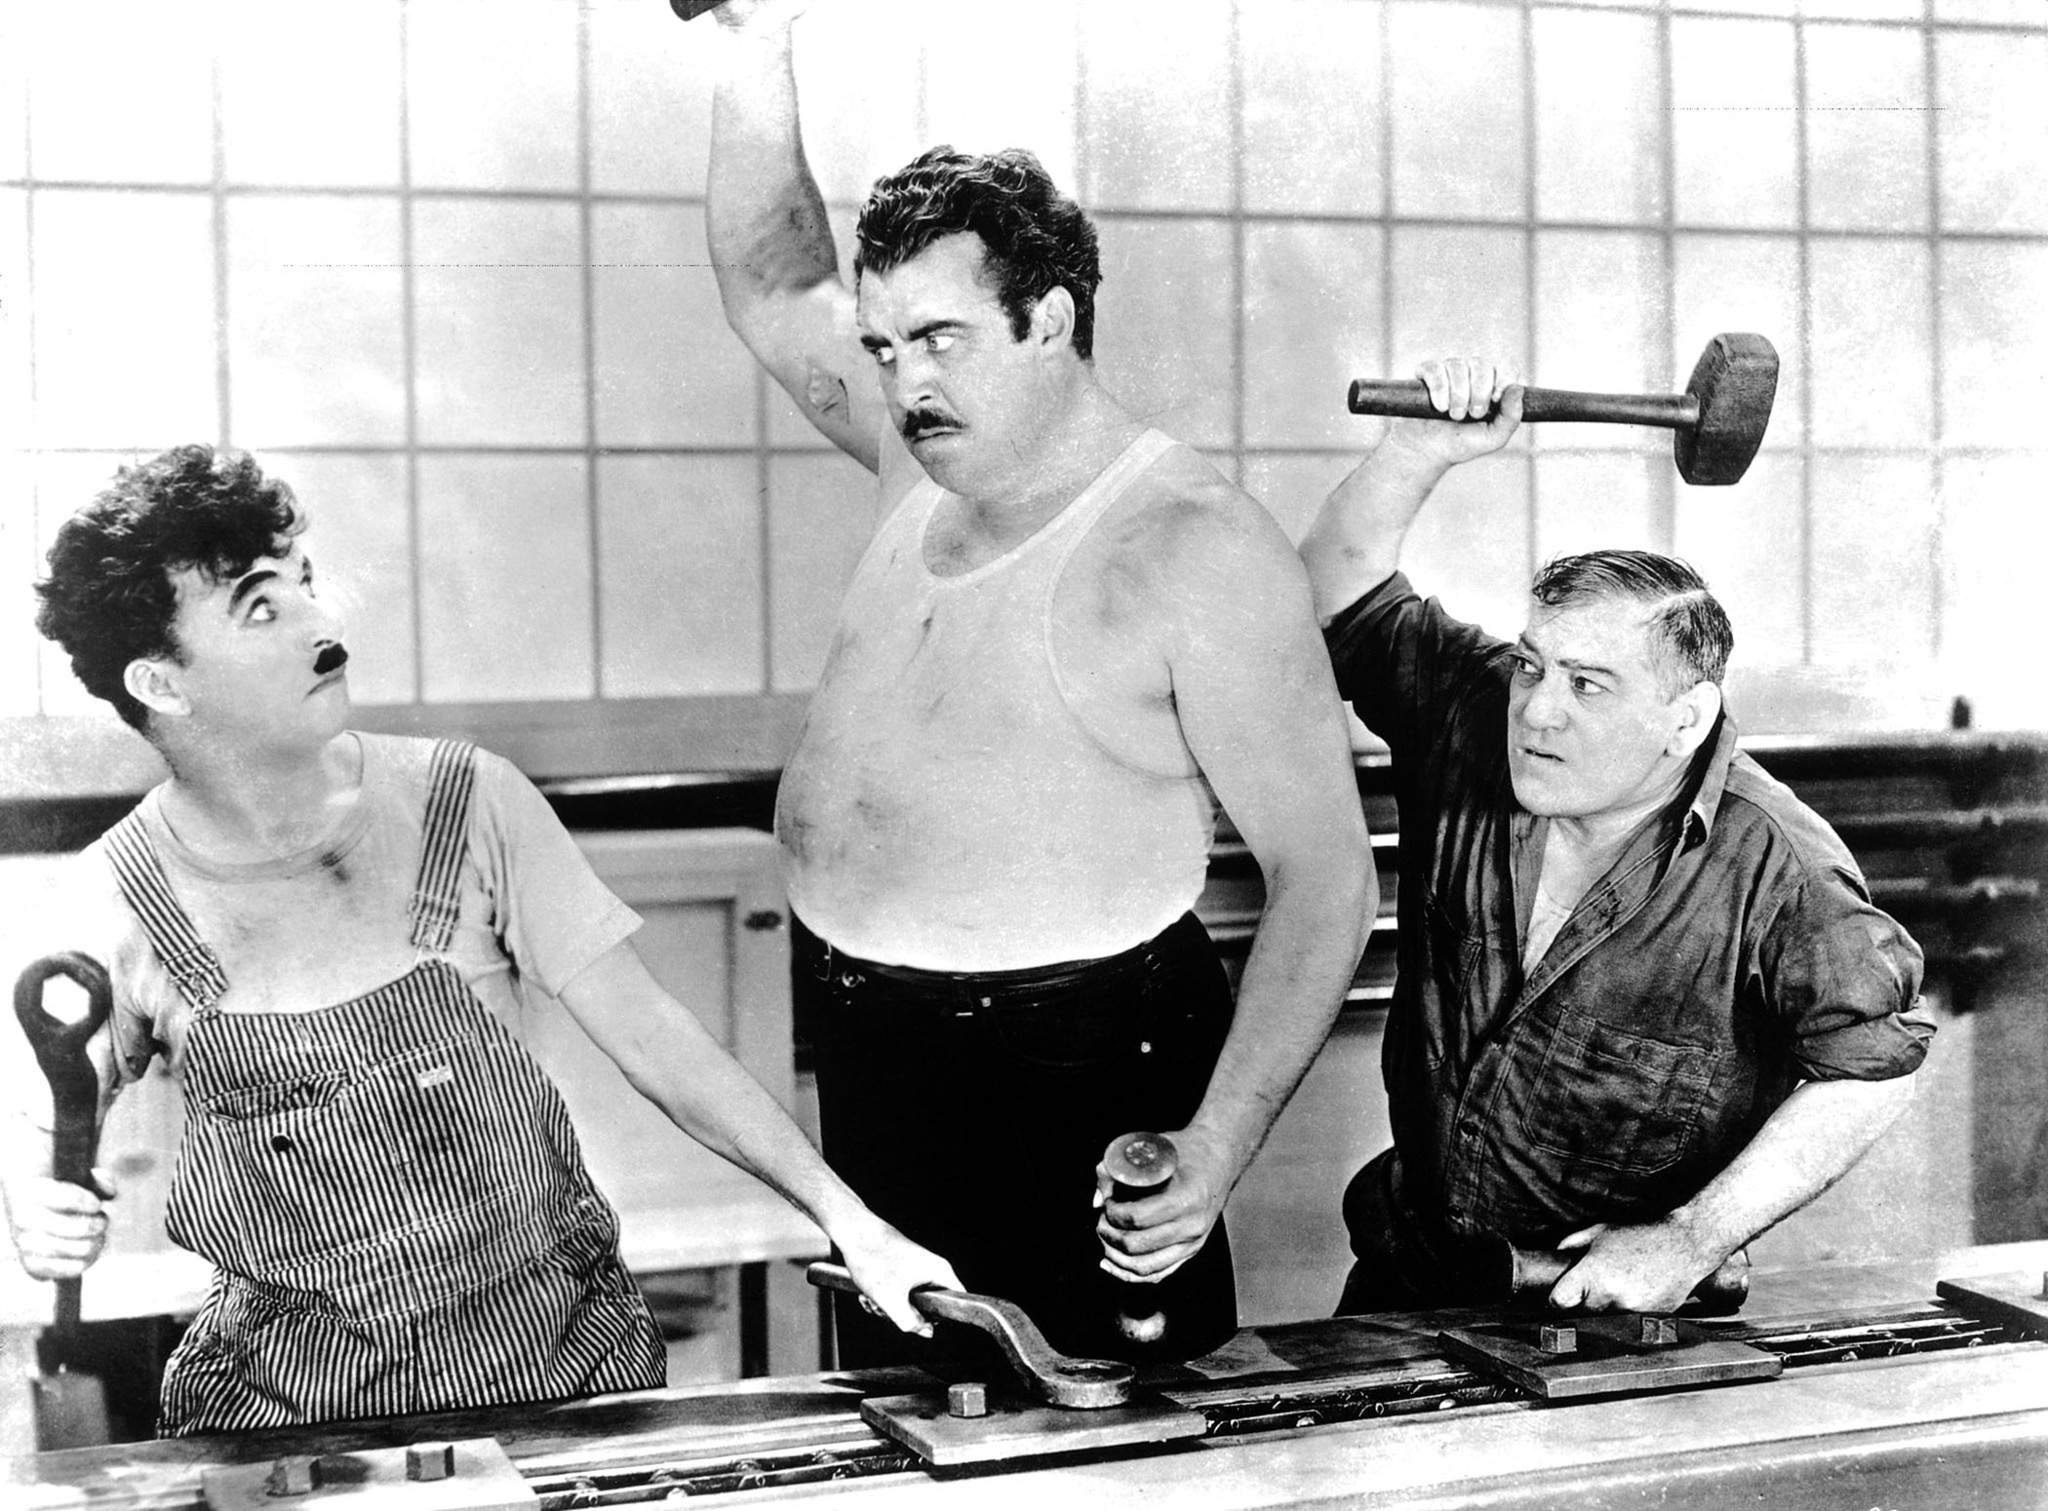 Charles Chaplin, Heinie Conklin, and Tiny Sandford in Modern Times (1936)